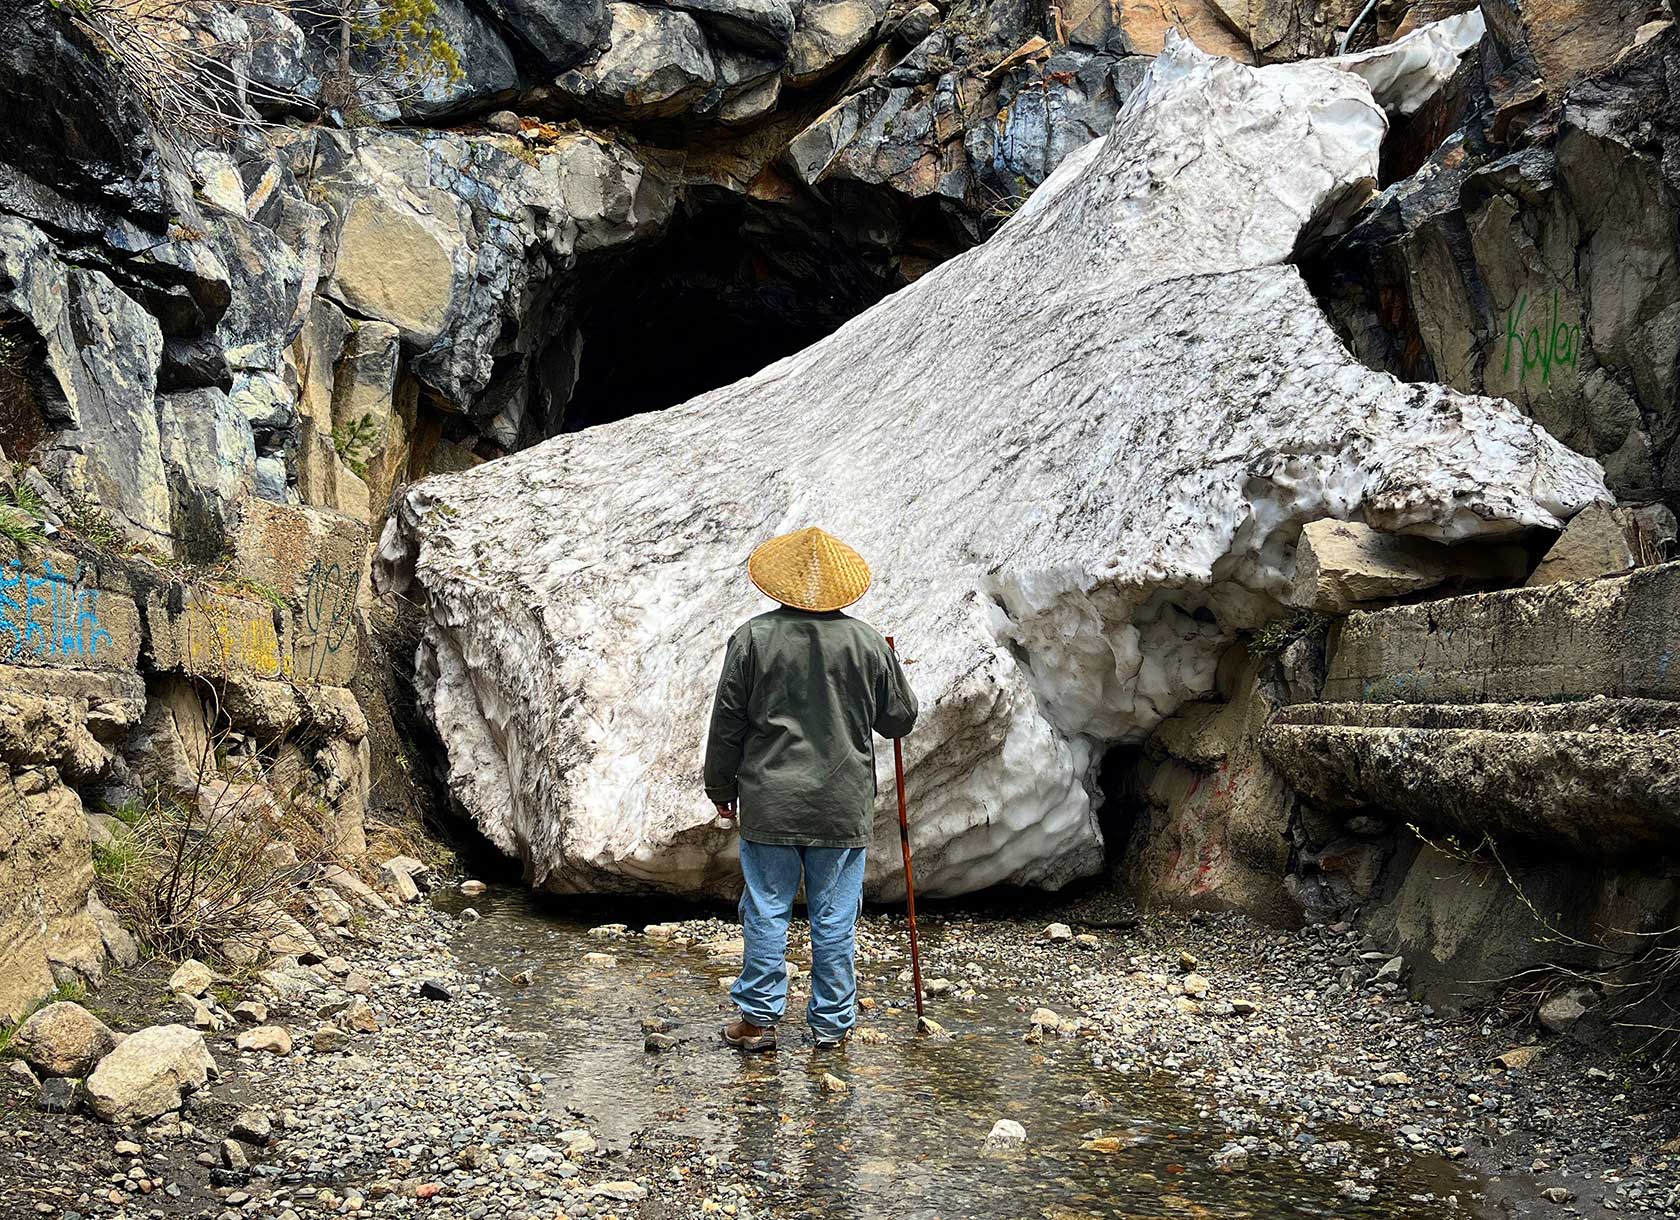 A man in a hat stands in a river, looking toward a rock face